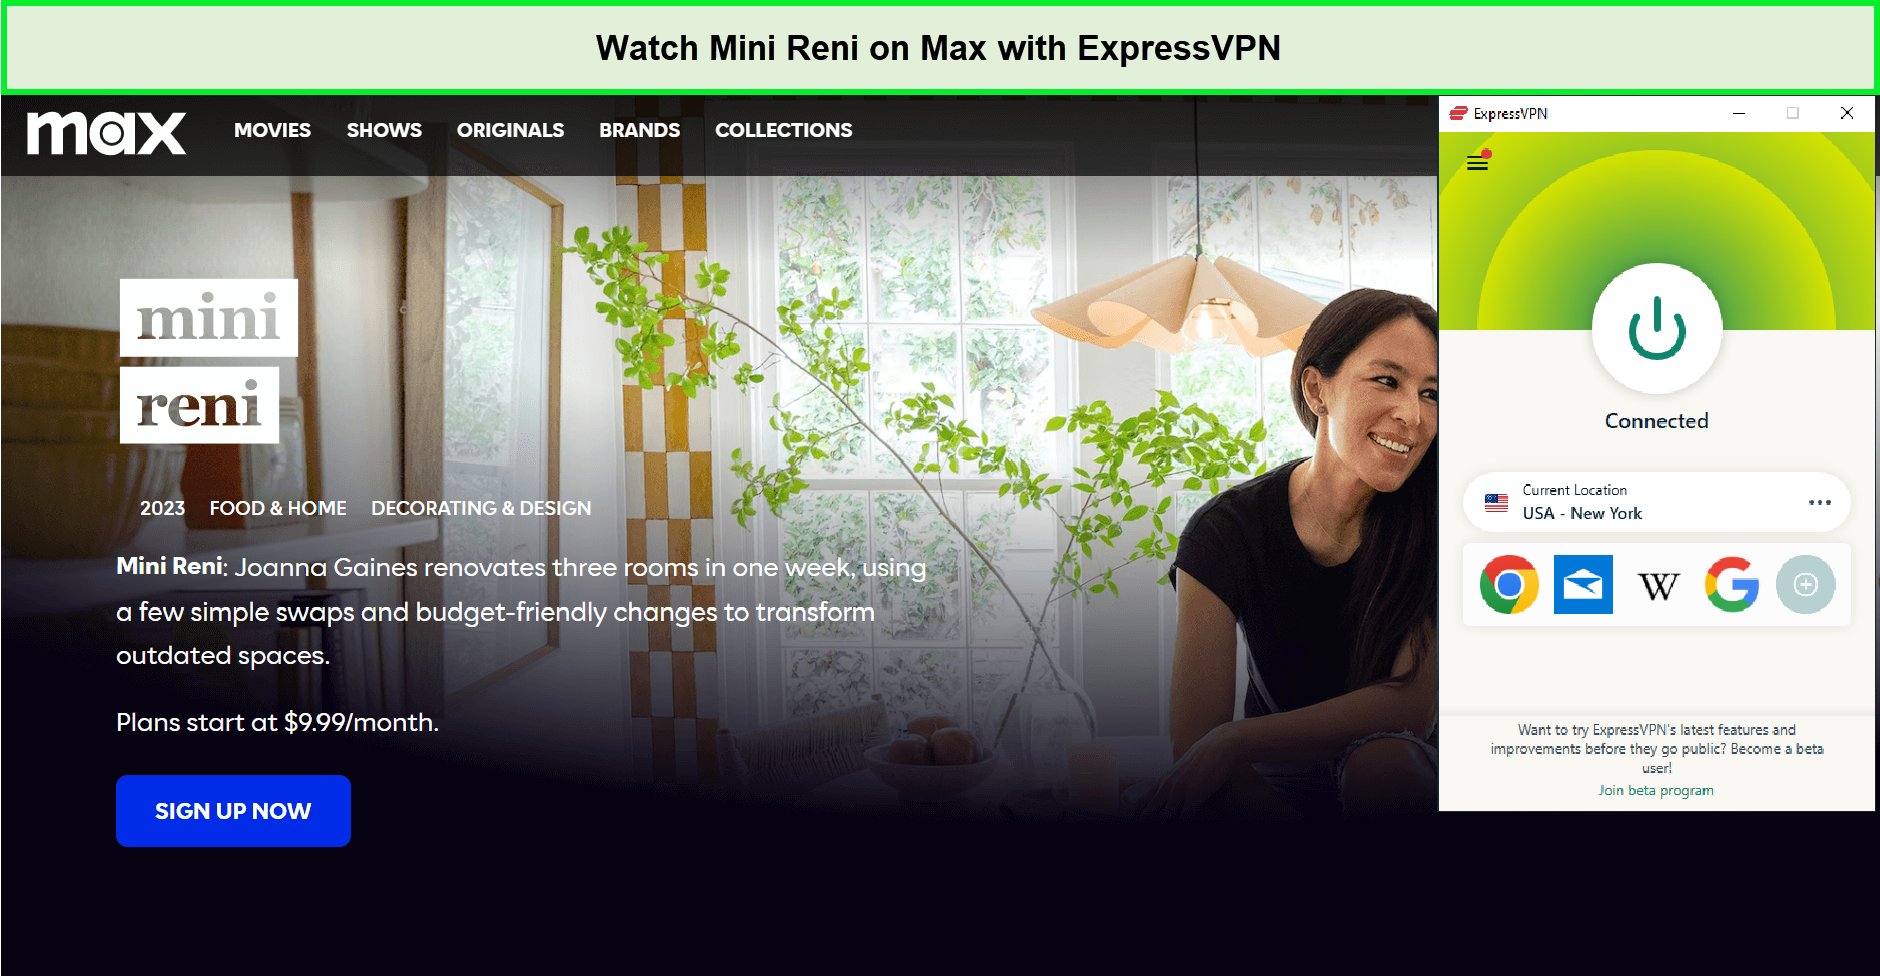 Watch-Mini-Reni-in-Canada-on-Max-with-ExpressVPN